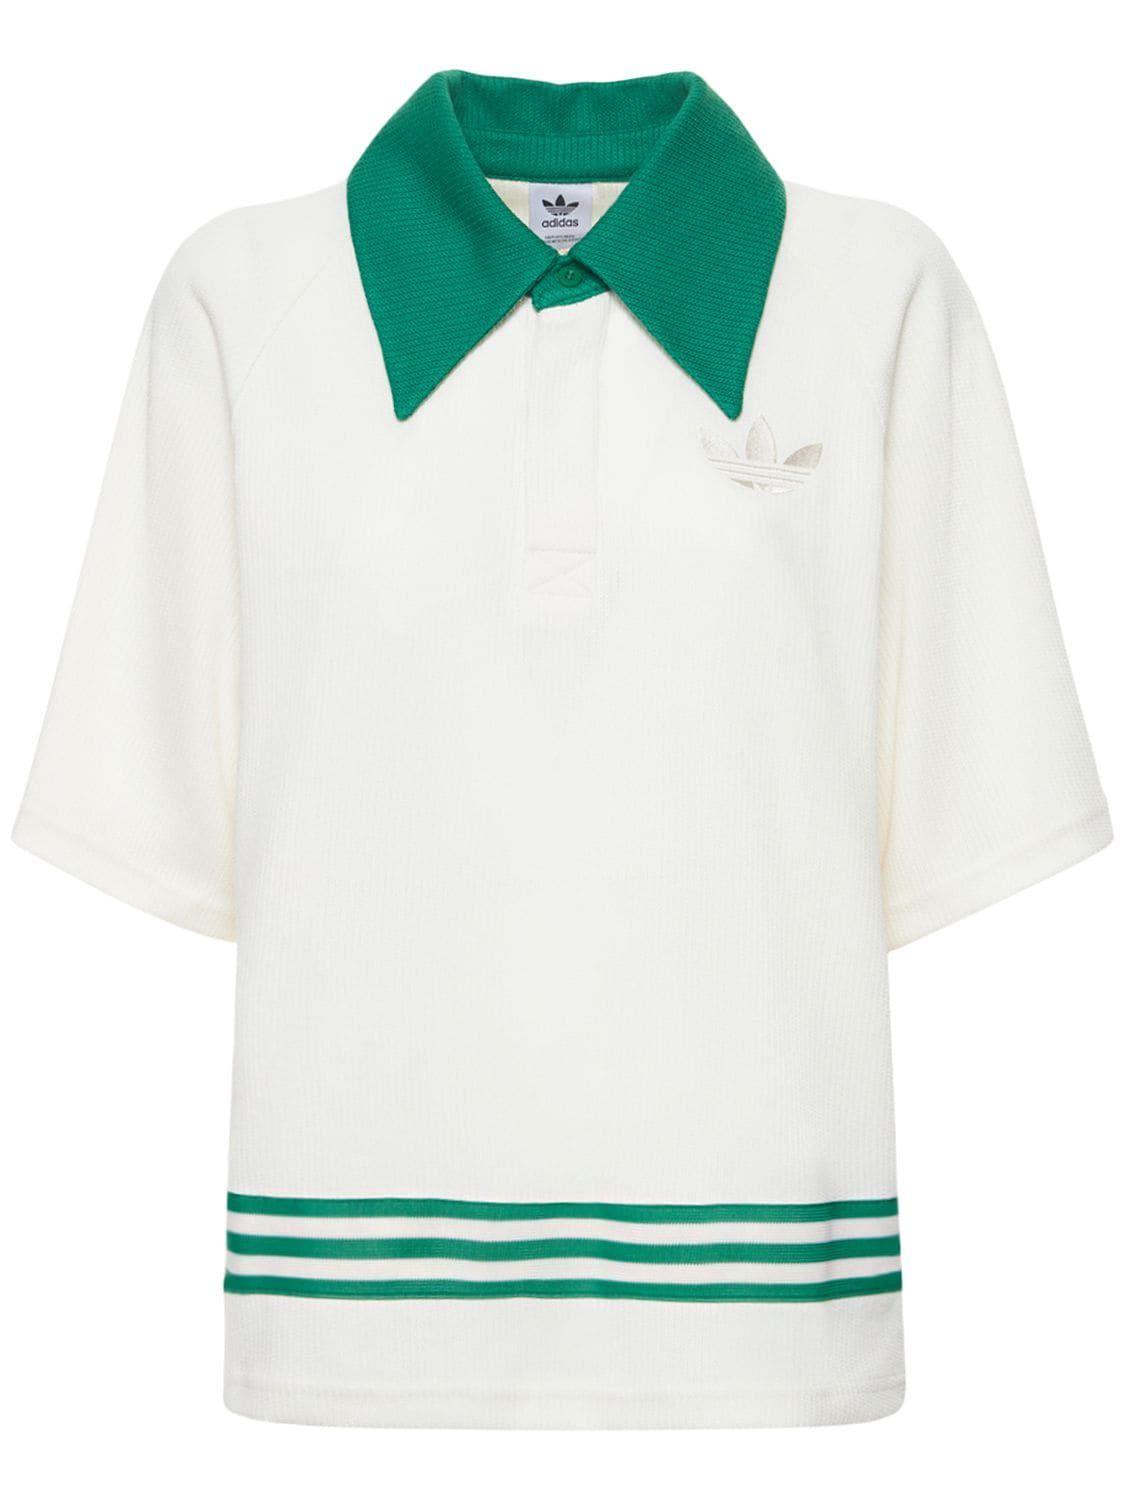 adidas Originals Knit Polo in Green | Lyst